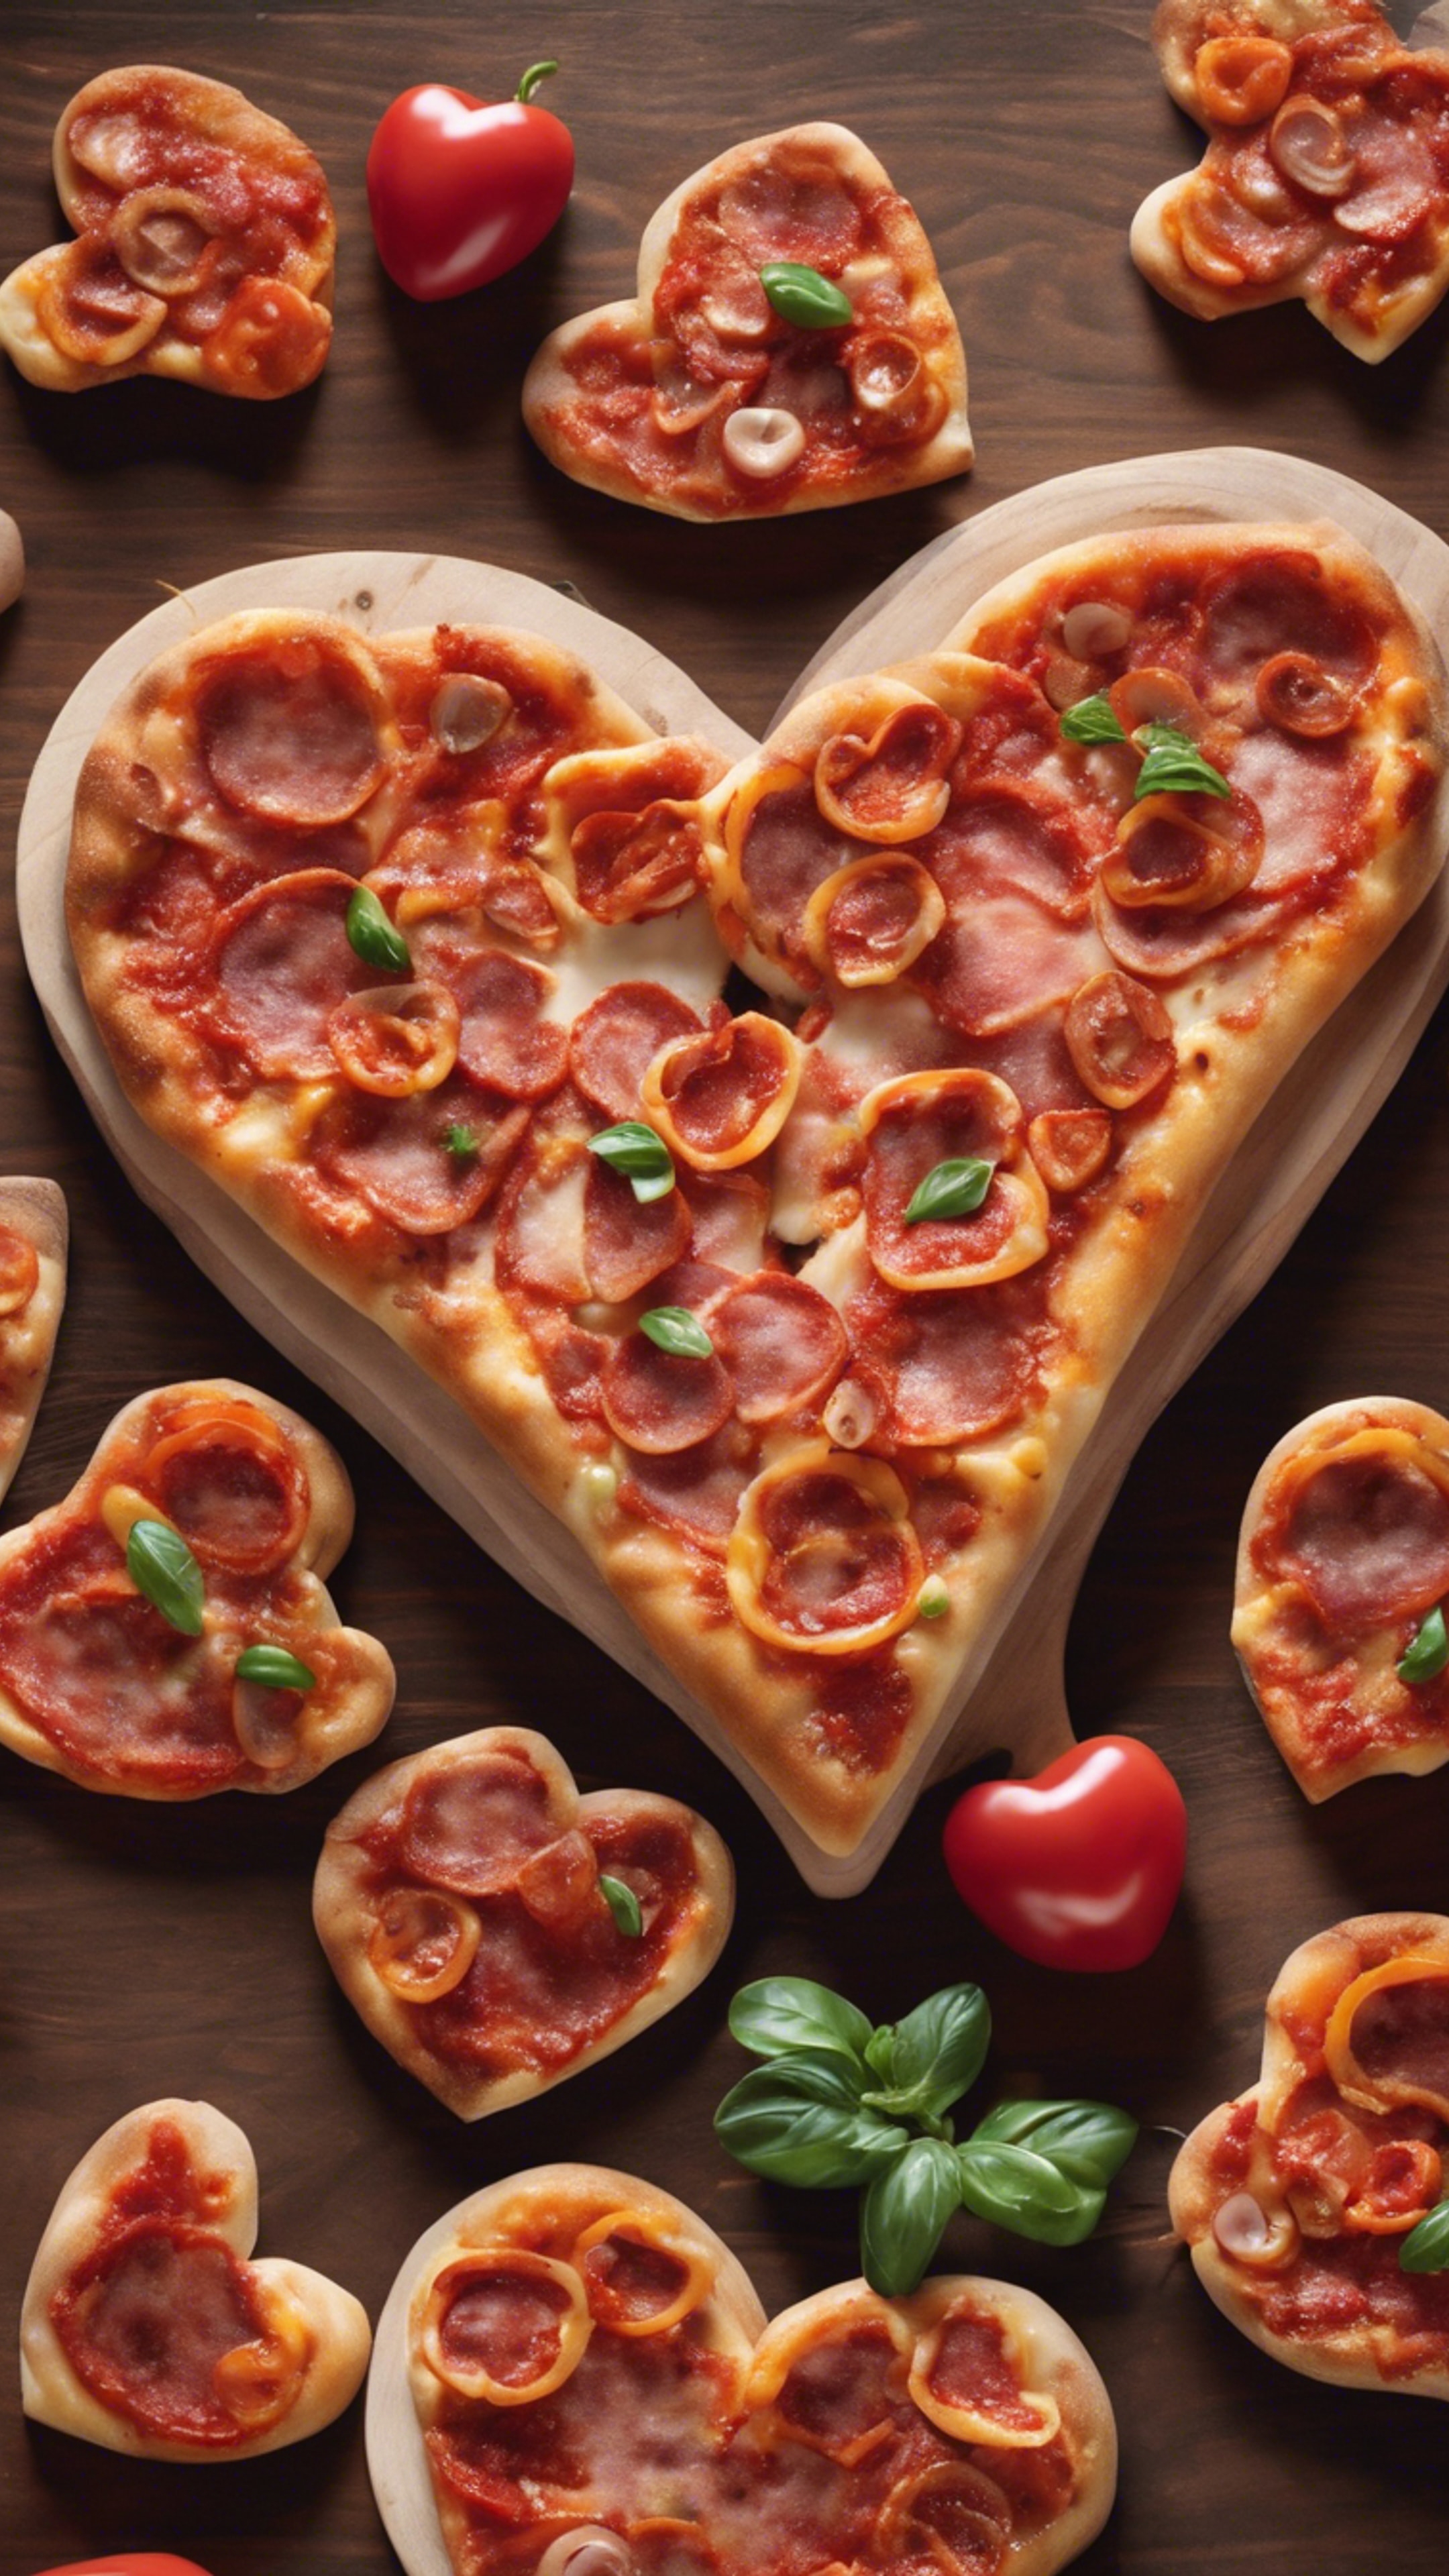 A heart-shaped pizza topped with pepperonis arranged in a smaller heart shape, the perfect cuisine for a romantic date. Обои[15df62b77c2f46a18143]